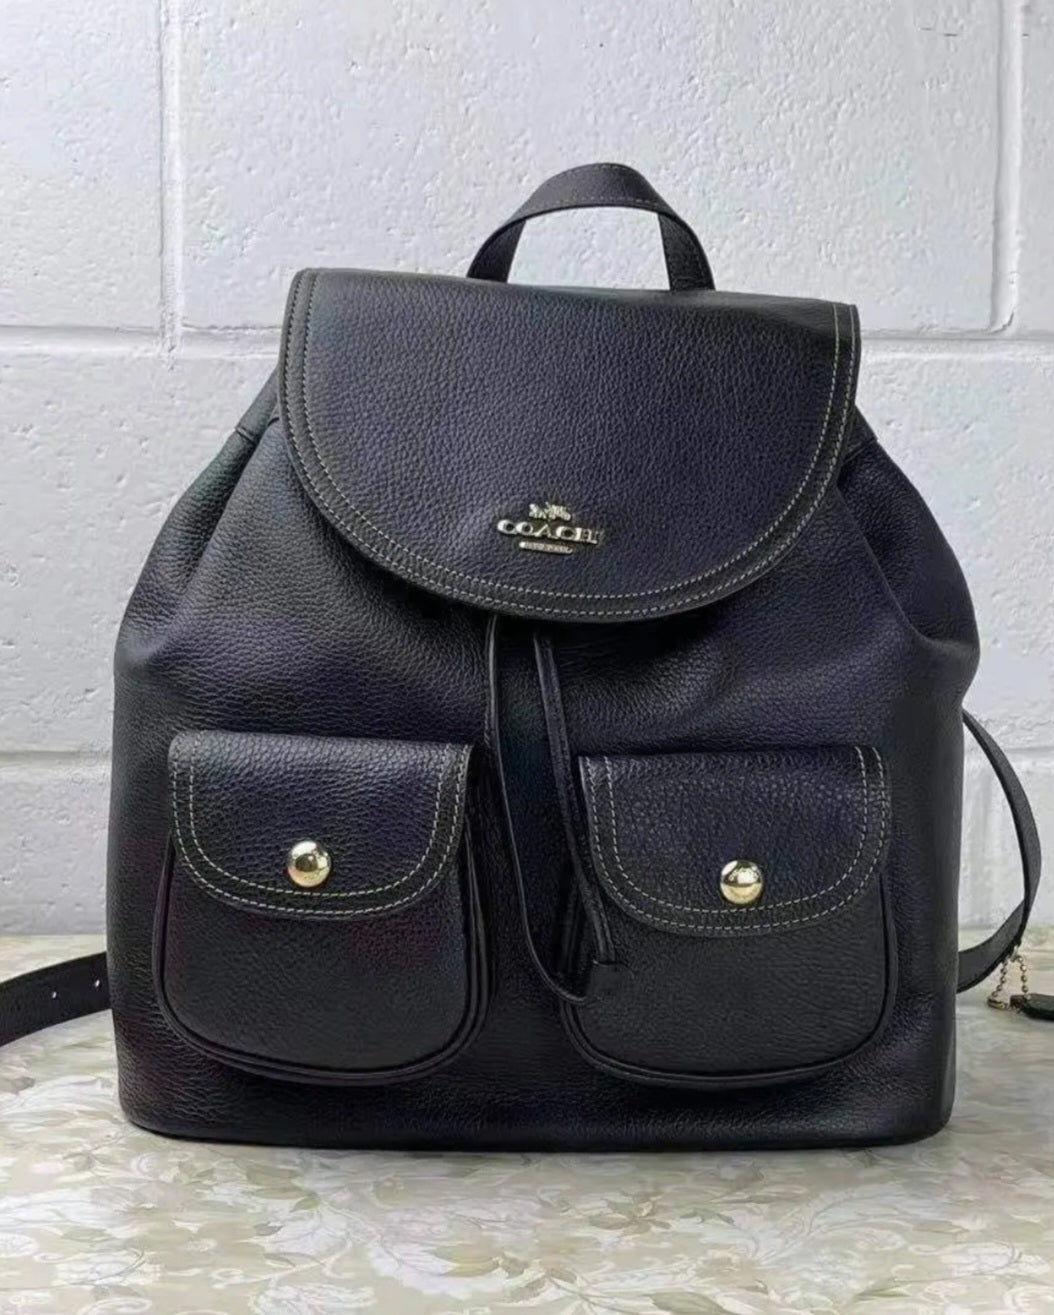 25% Off In Cart Limited Time Only! Used Coach 6145 Pennie Backpack in Black